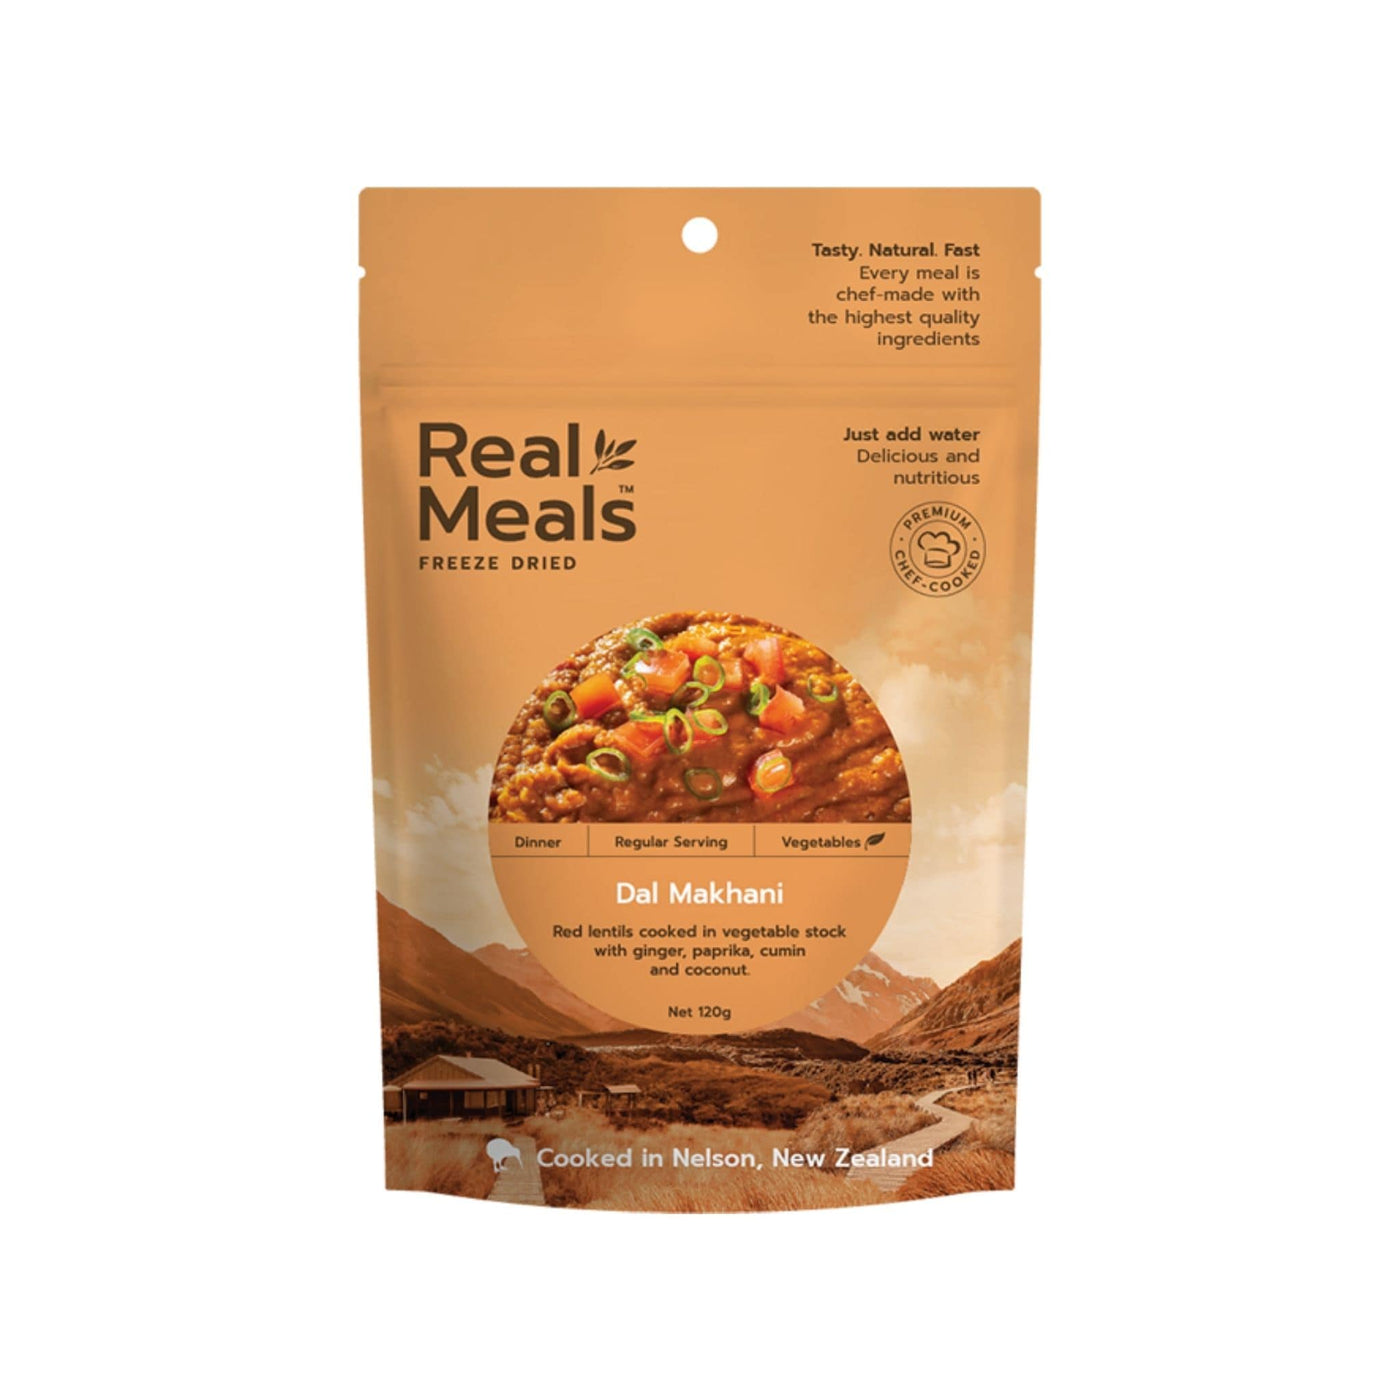 Real Meals Dinner - Dal Makhani | Freeze Dried Meals | Further Faster Christchurch NZ